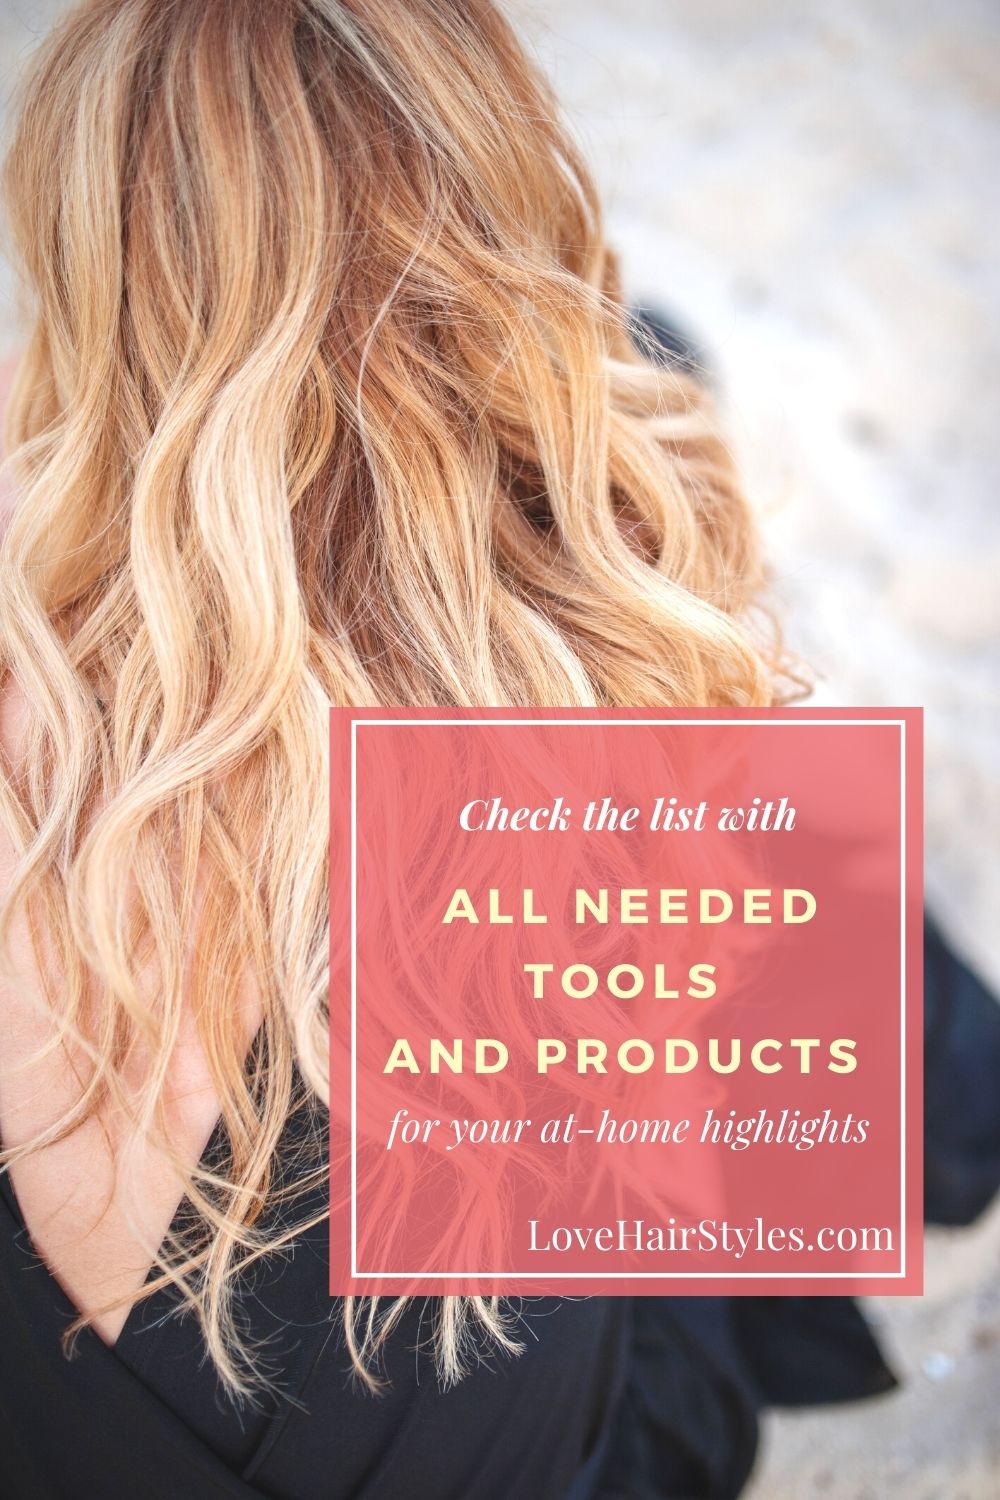 All the needed tools and products for your at-home highlights